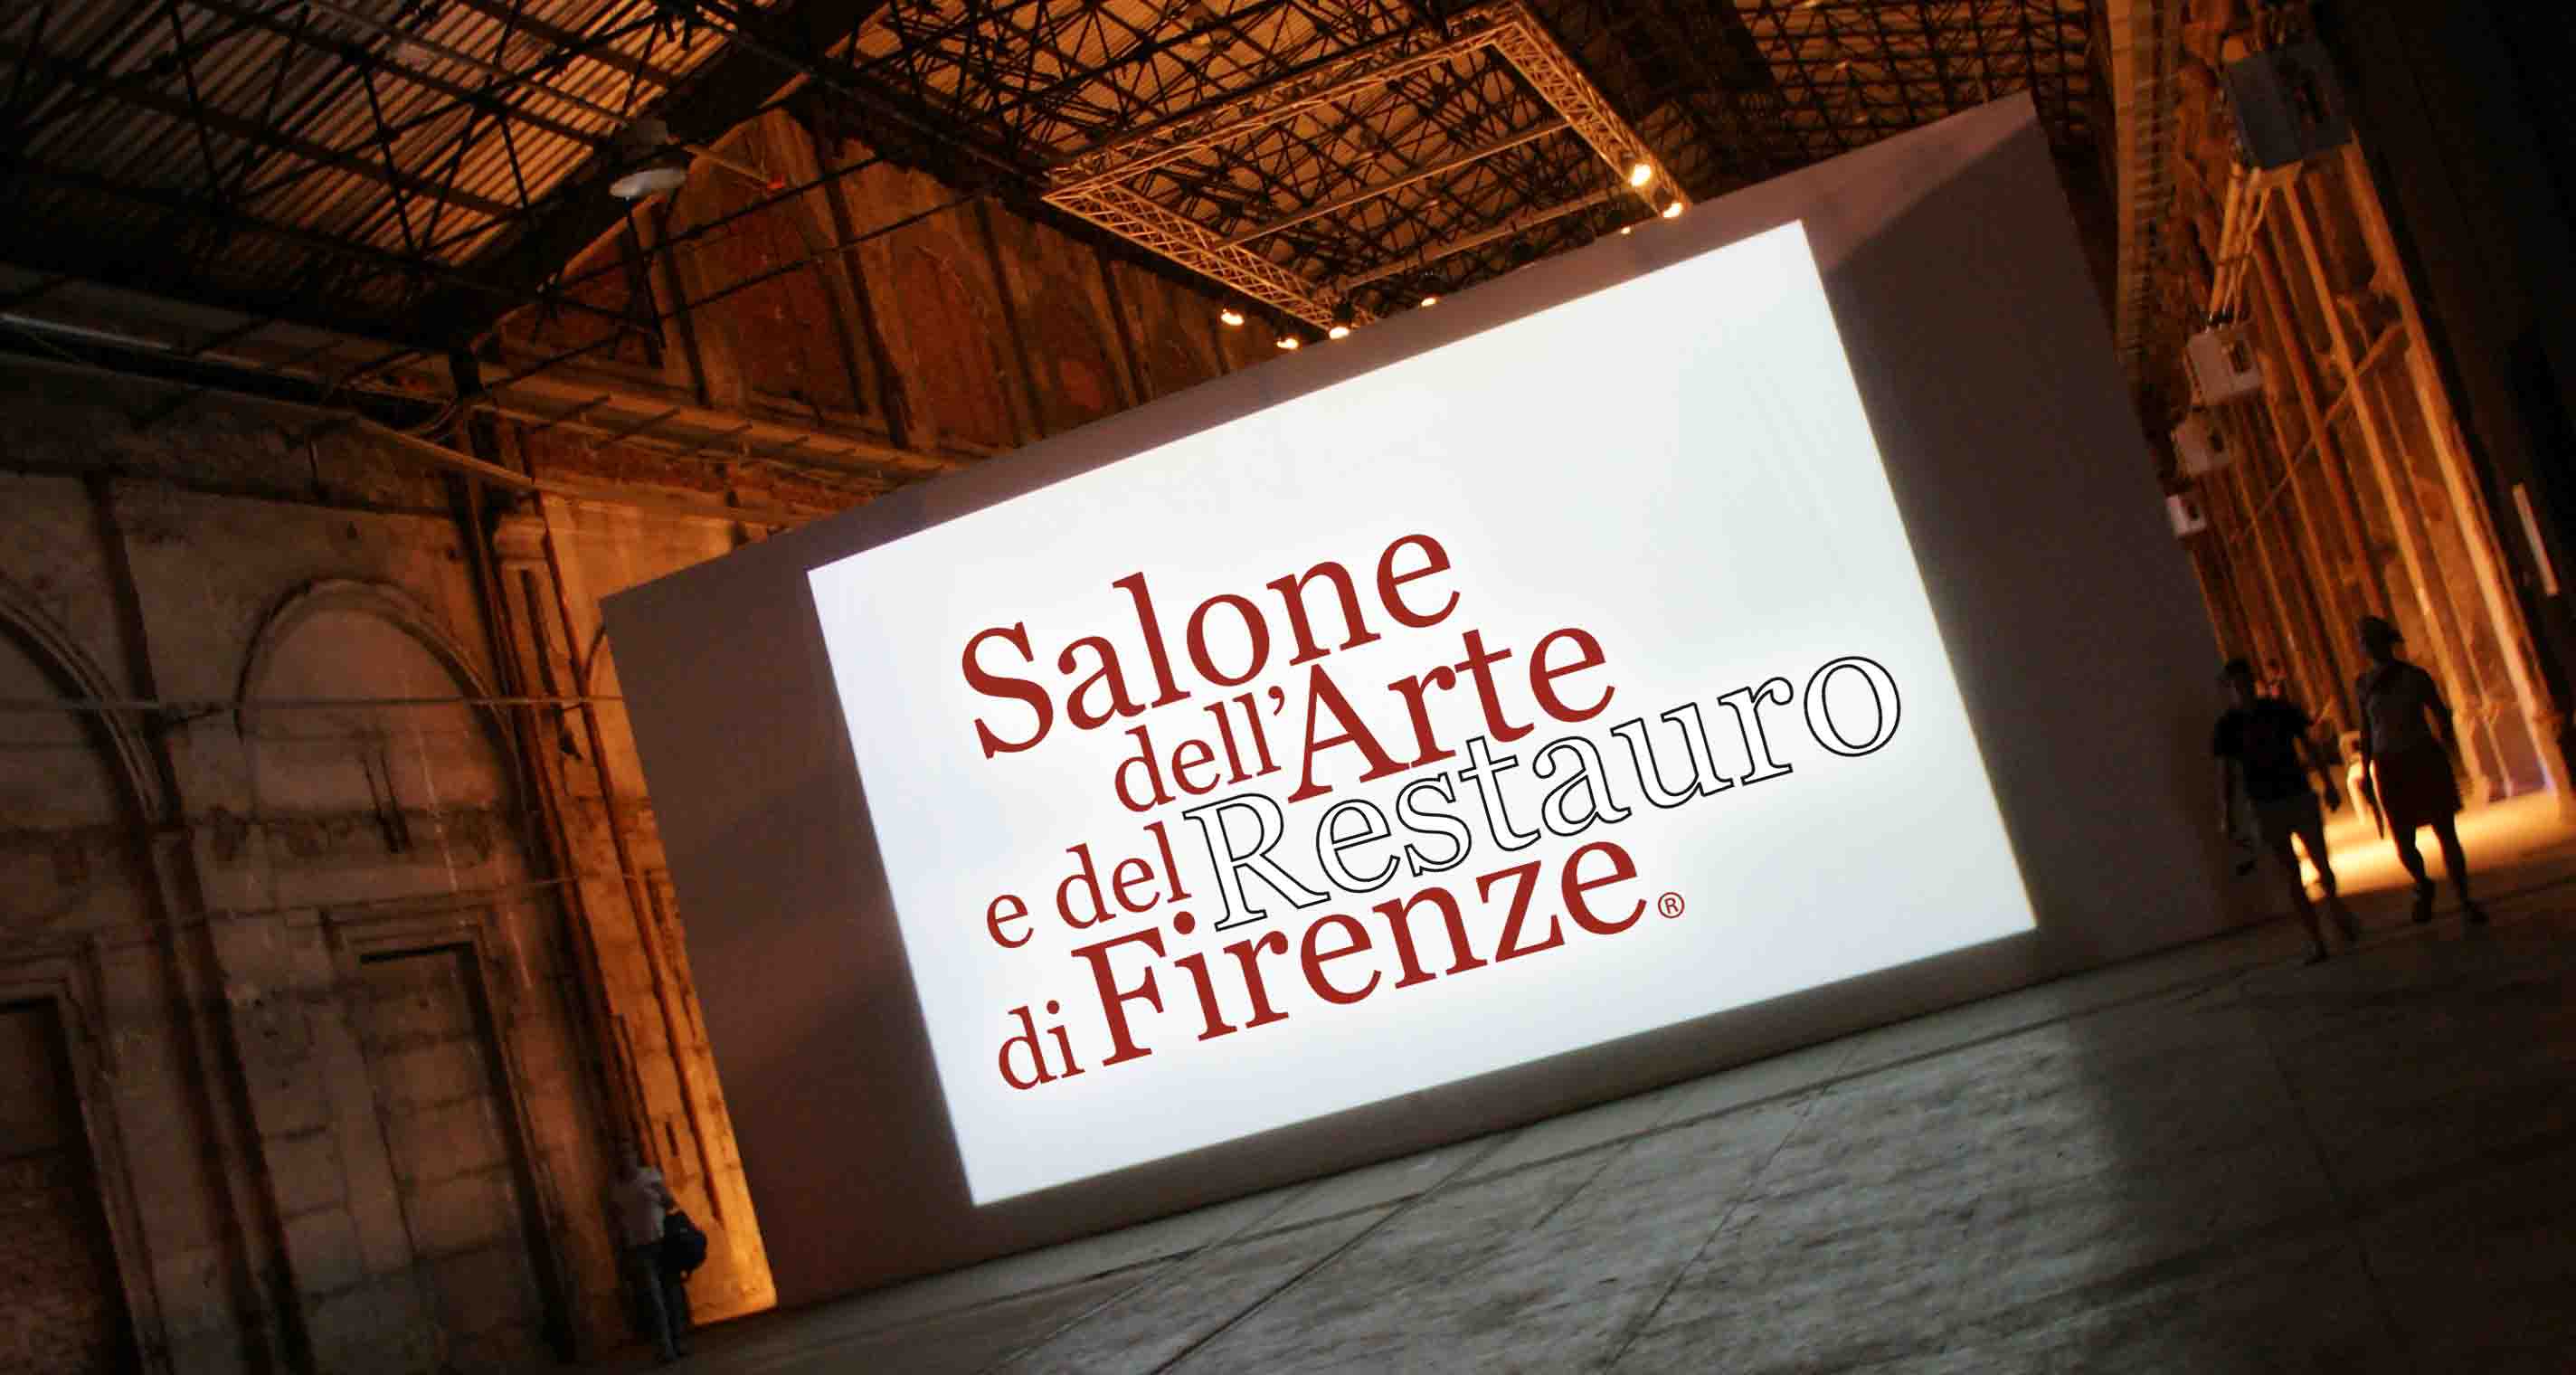 CAPuS project presented at the 6th International Art and Restoration Fair in Florence, Italy